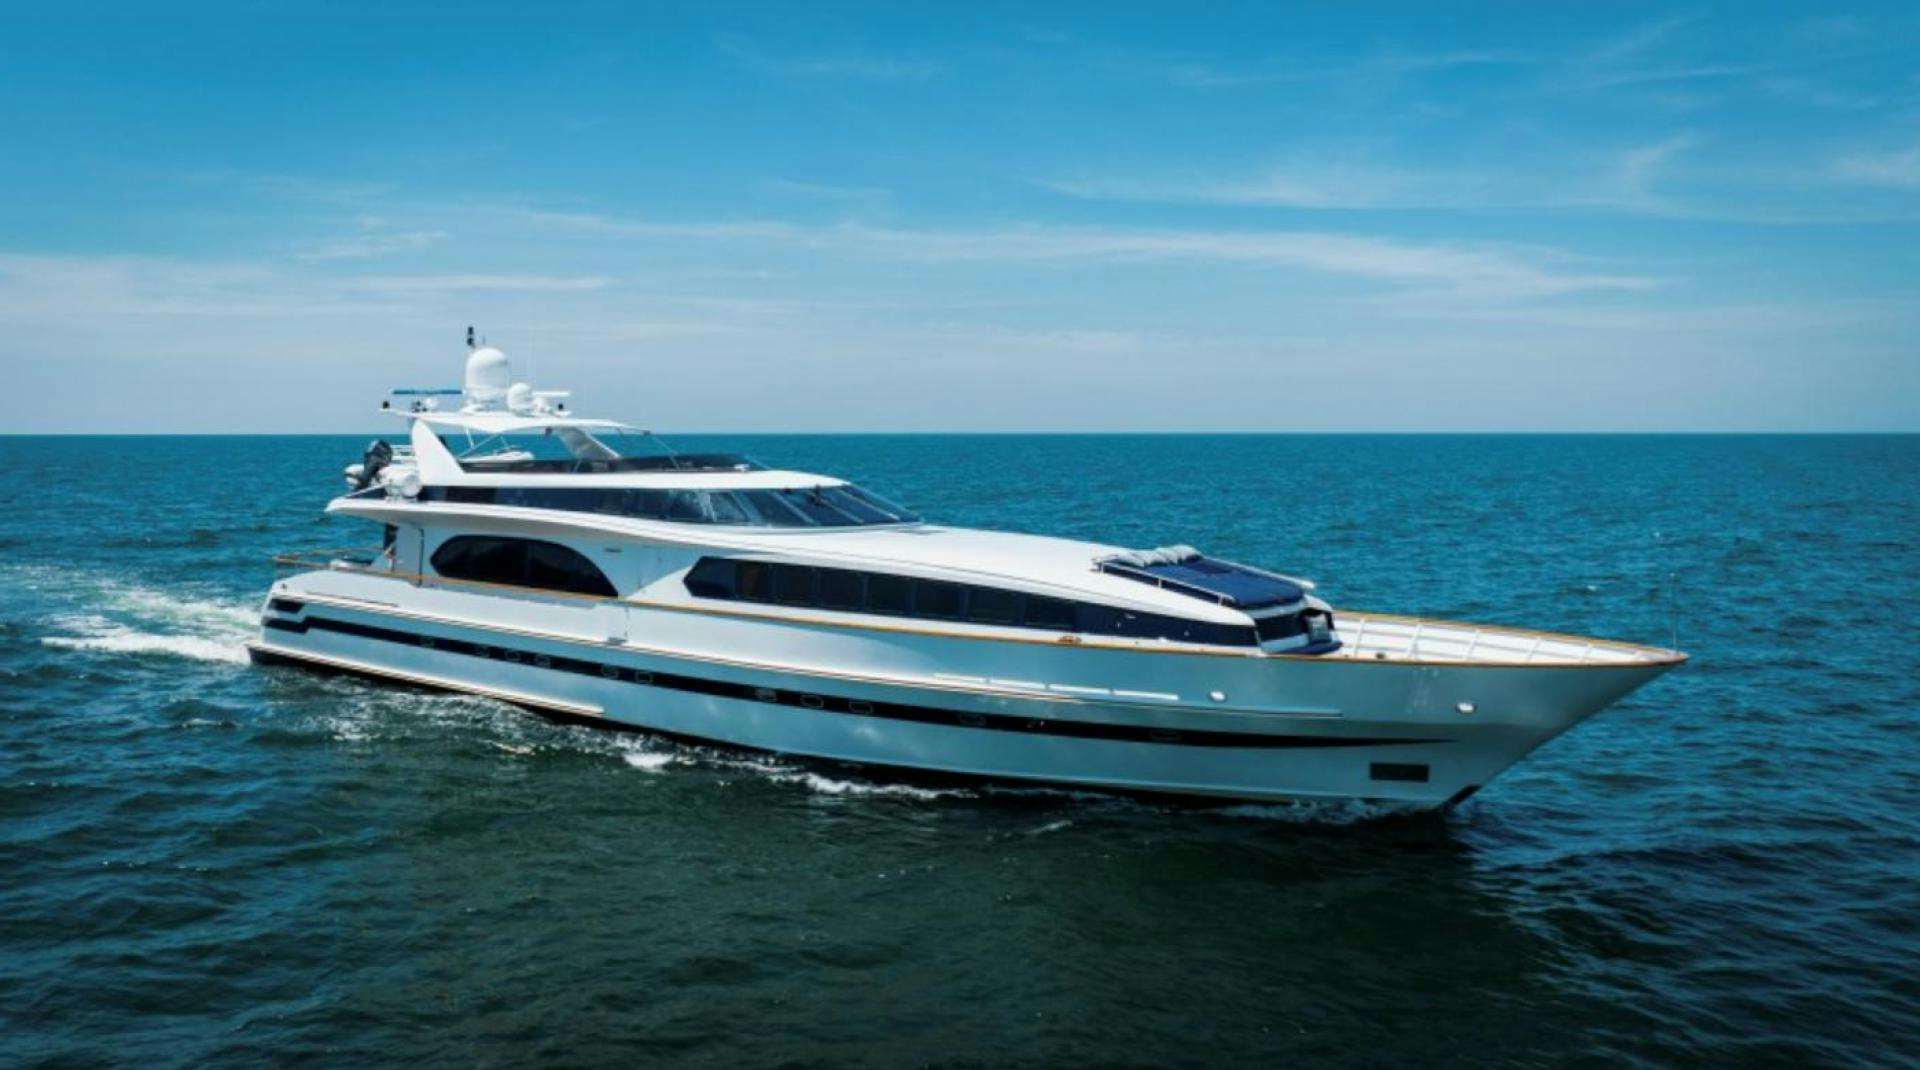 Caprice
Yacht for Sale